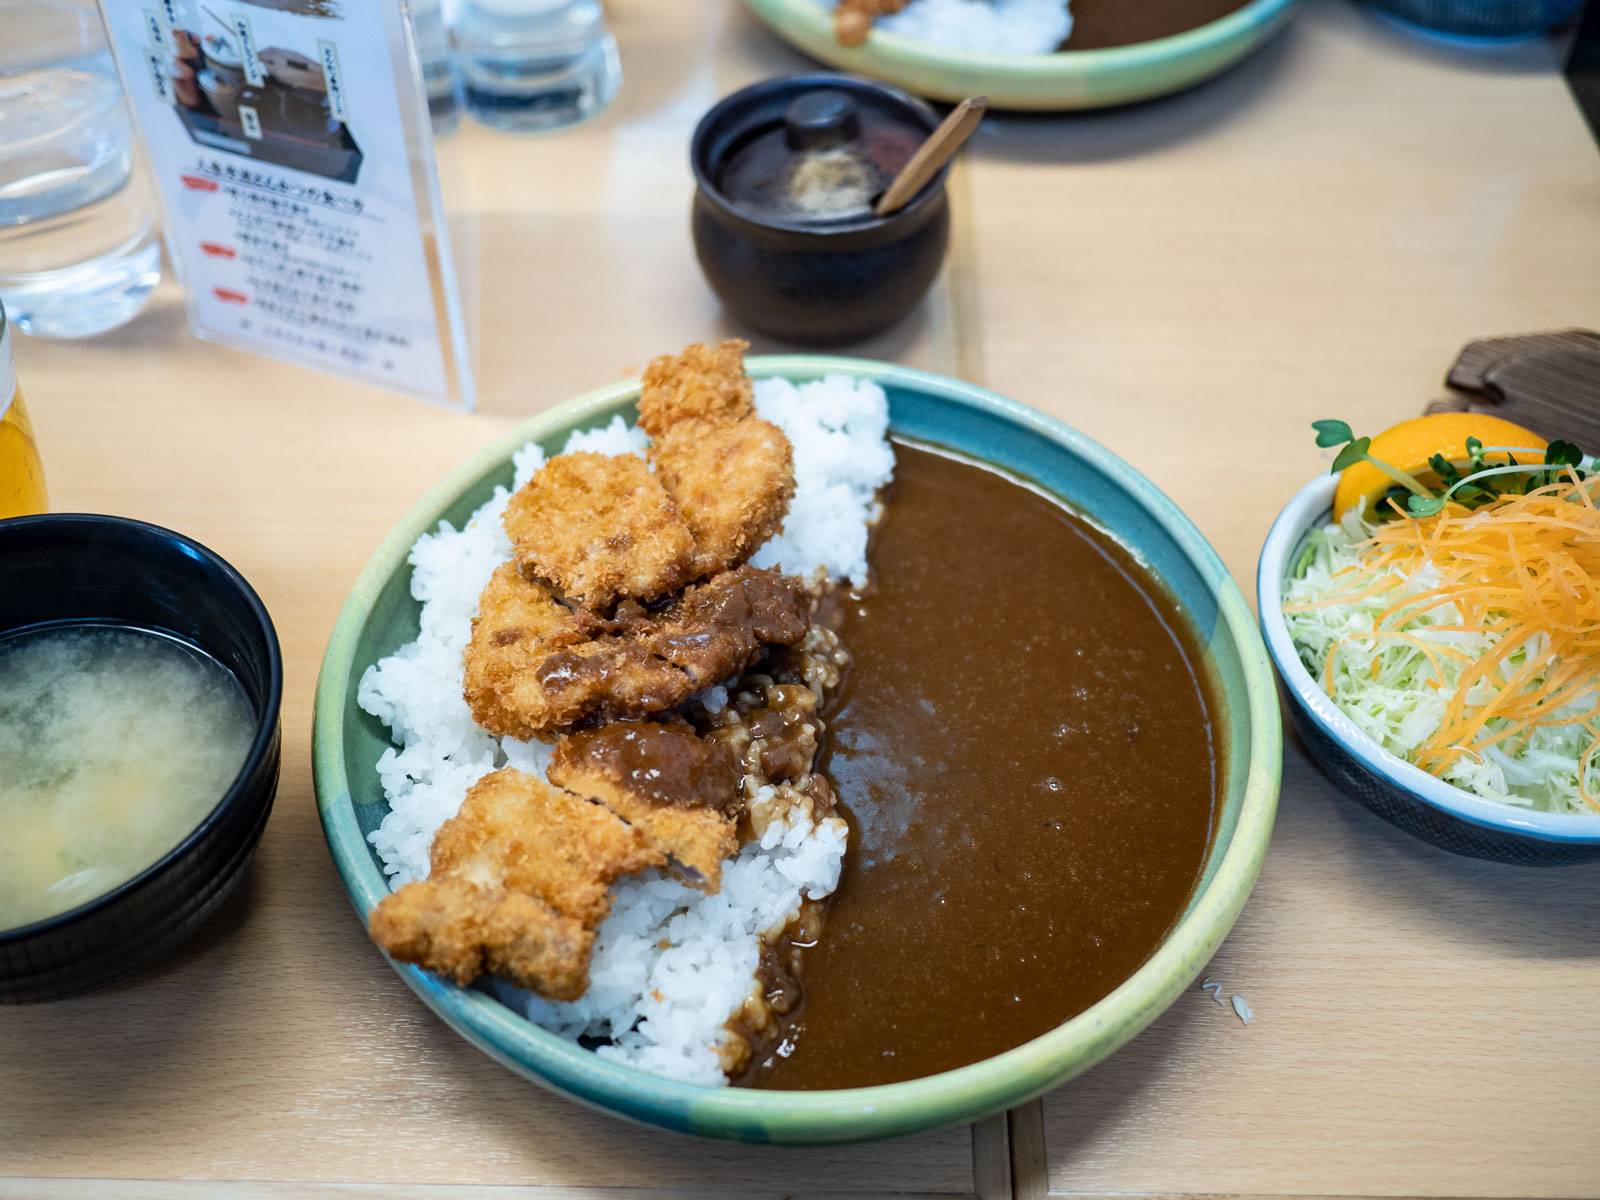 A large bowl of katsu curry and rice